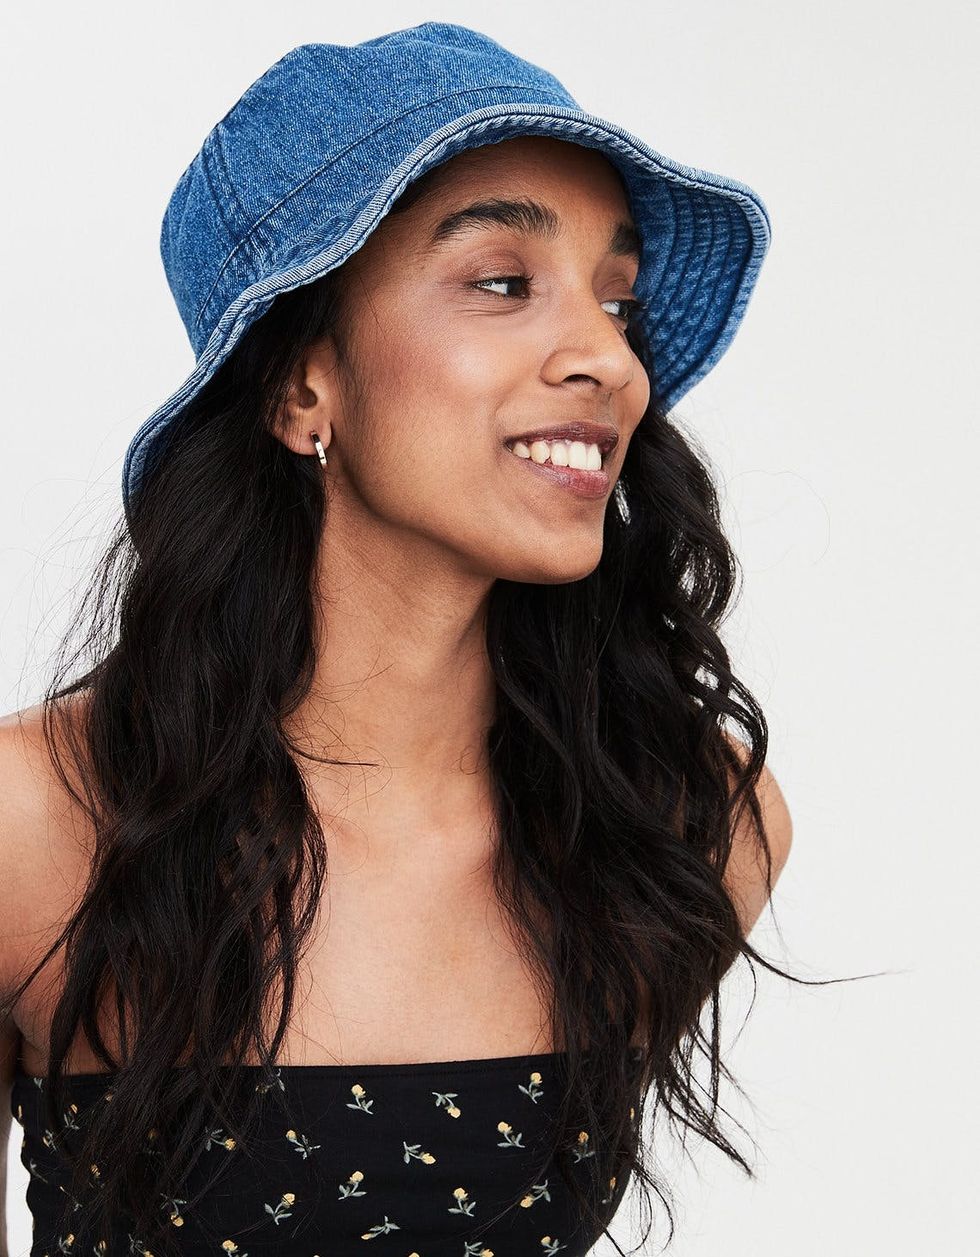 How to Finally Find the Right Hat for Your Face Shape - Brit + Co